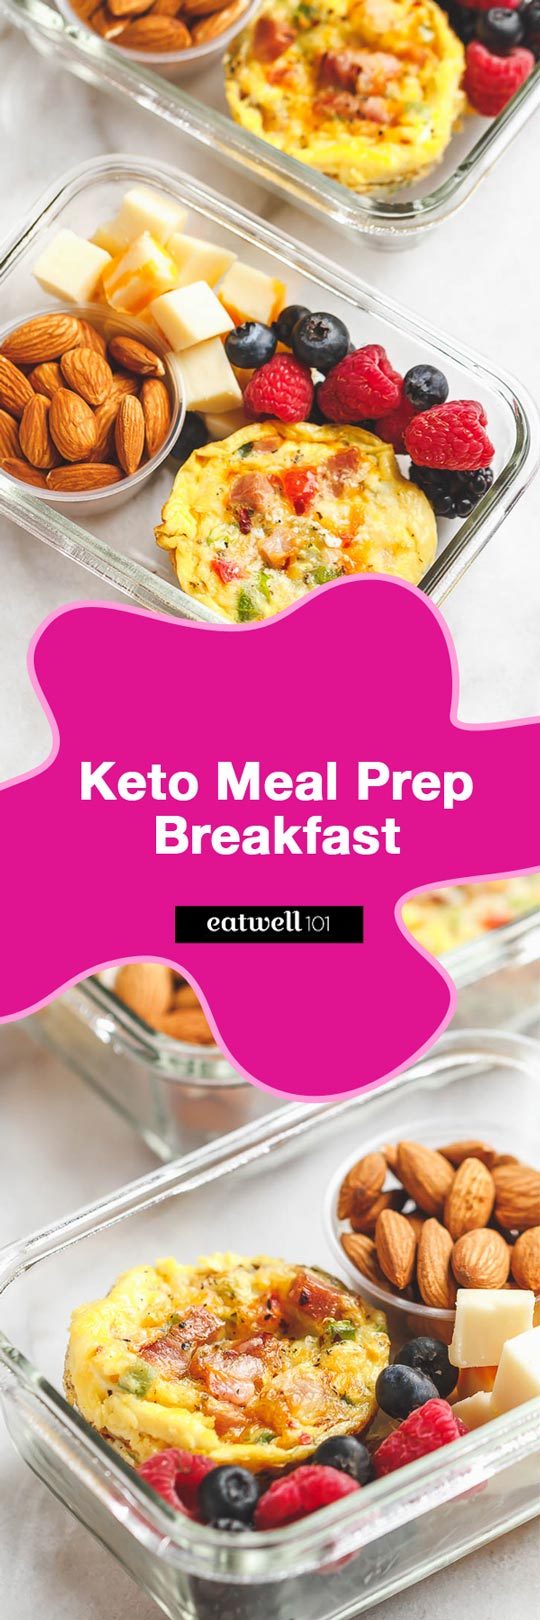 Easy Keto Meal Prep Breakfast - #keto #breakfast #recipe #eatwell101 - Packed with protein and so convenient for busy mornings, this is the perfect make-ahead option for on the go.